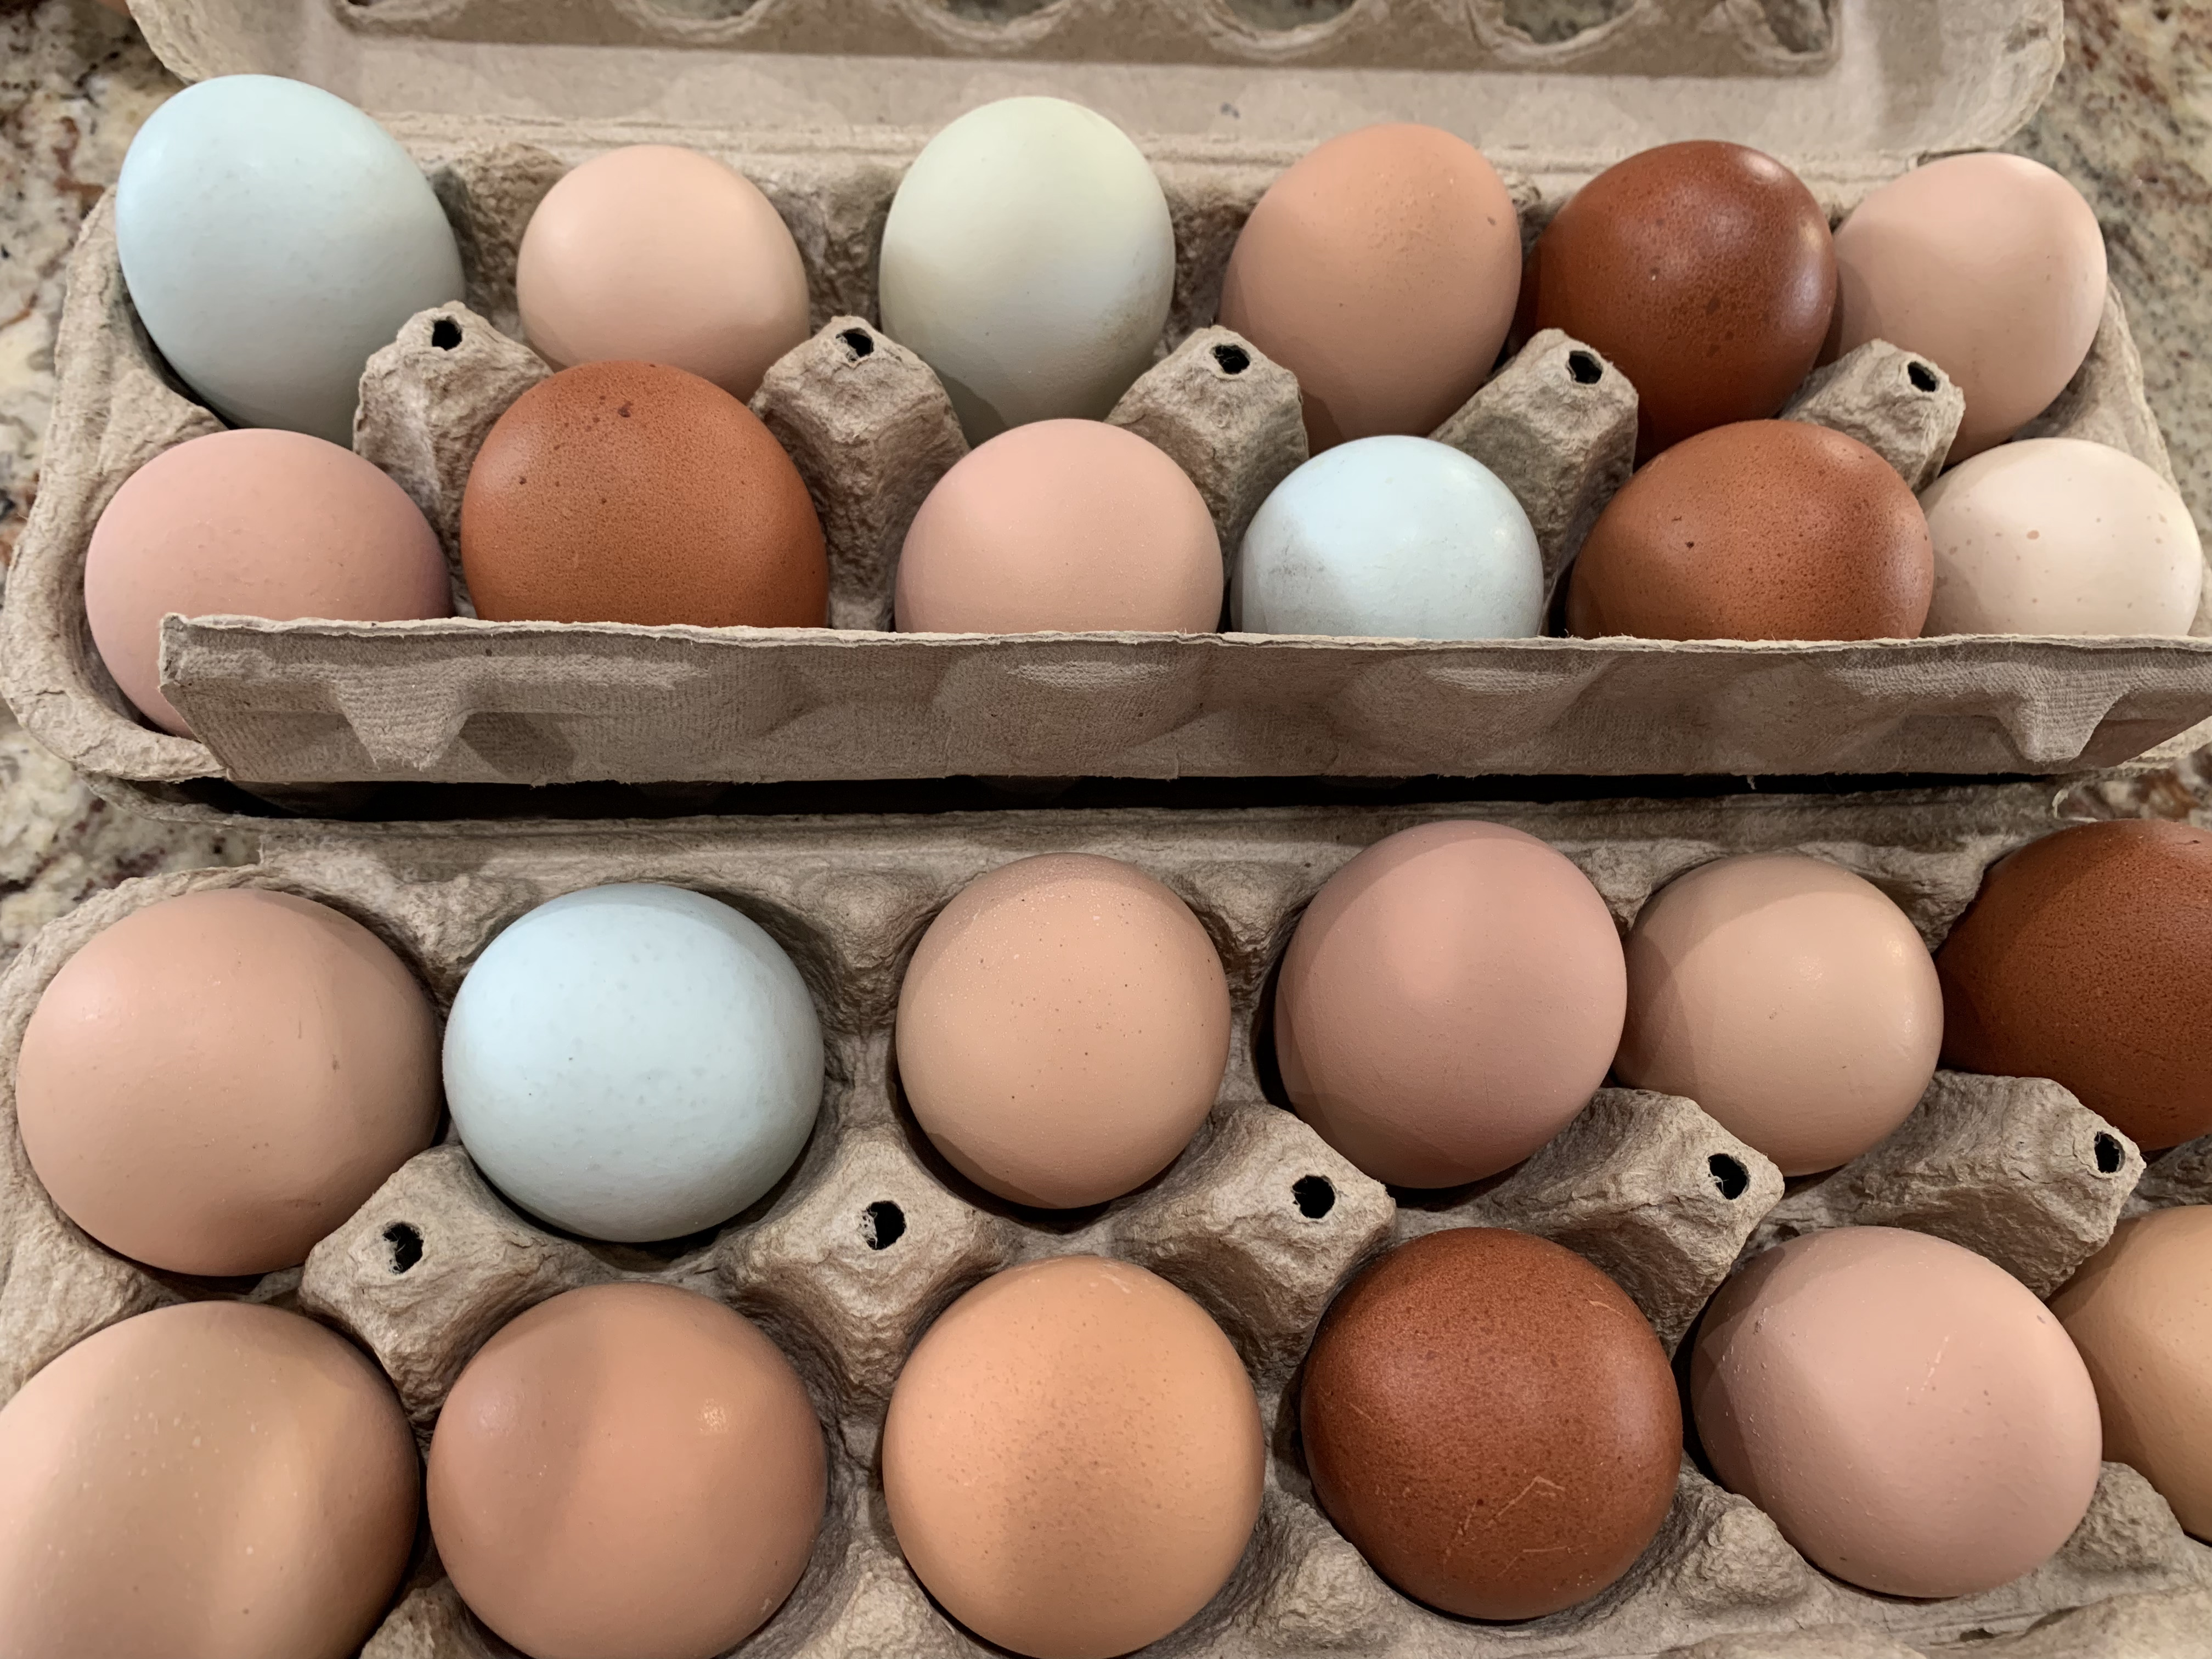 Variety of Eggs in Carton